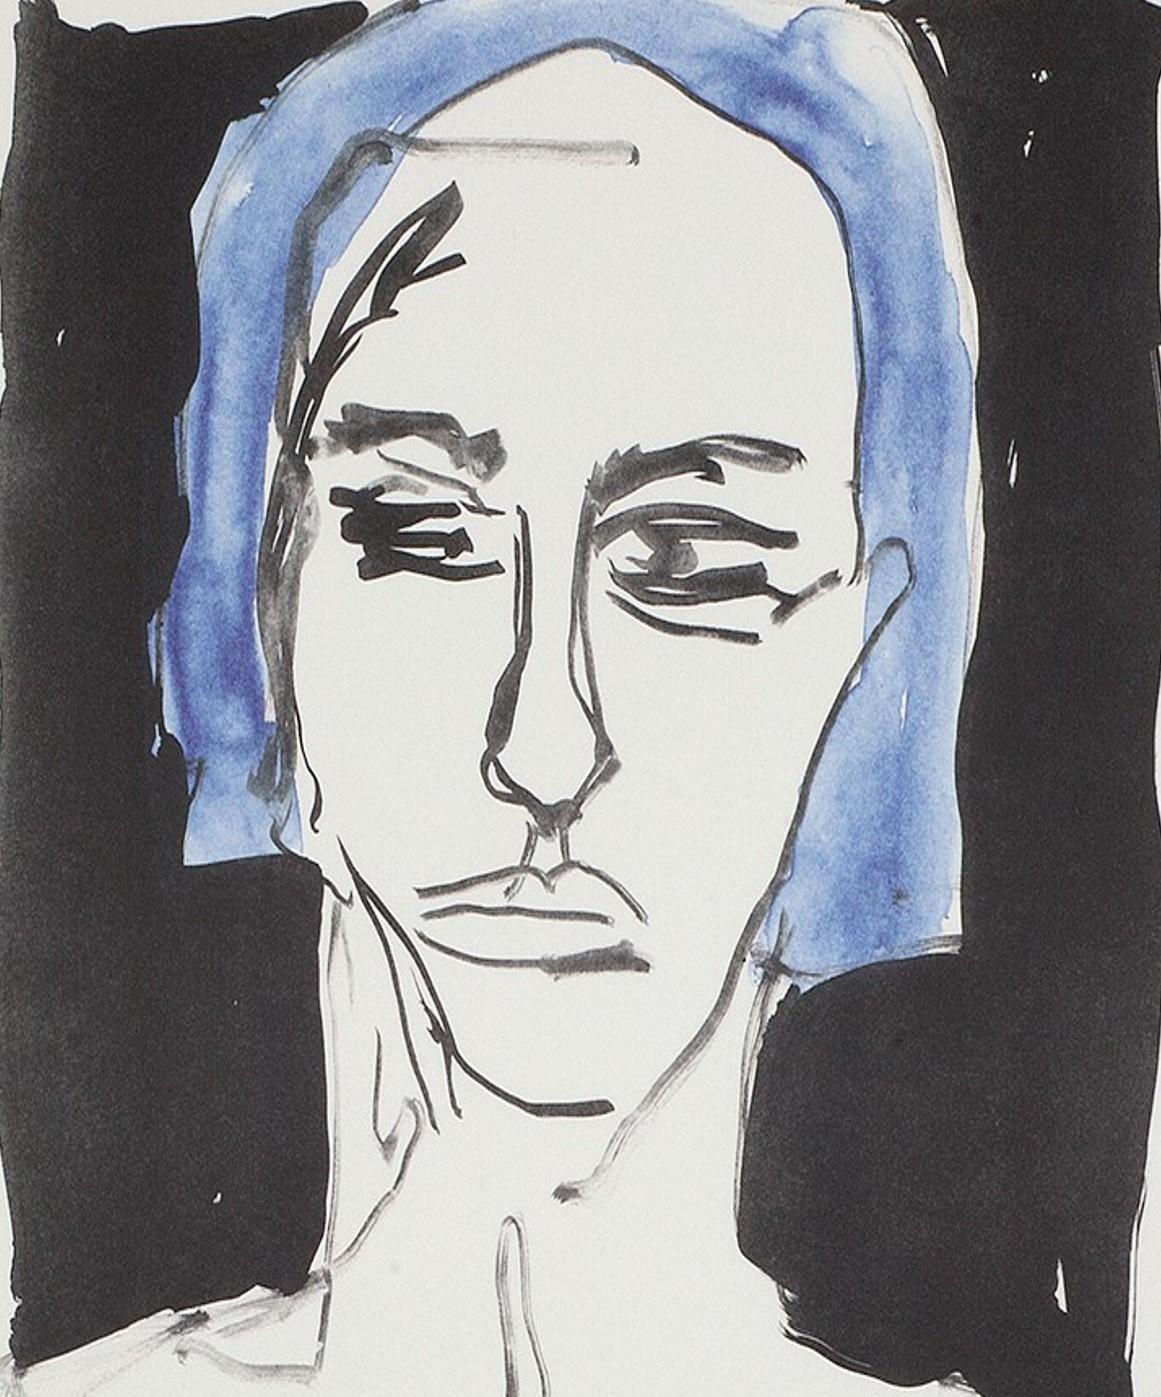 Me - May 2019 - Emin, Contemporary, YBAs, Lithograph, Portrait, Blue - Print by Tracey Emin